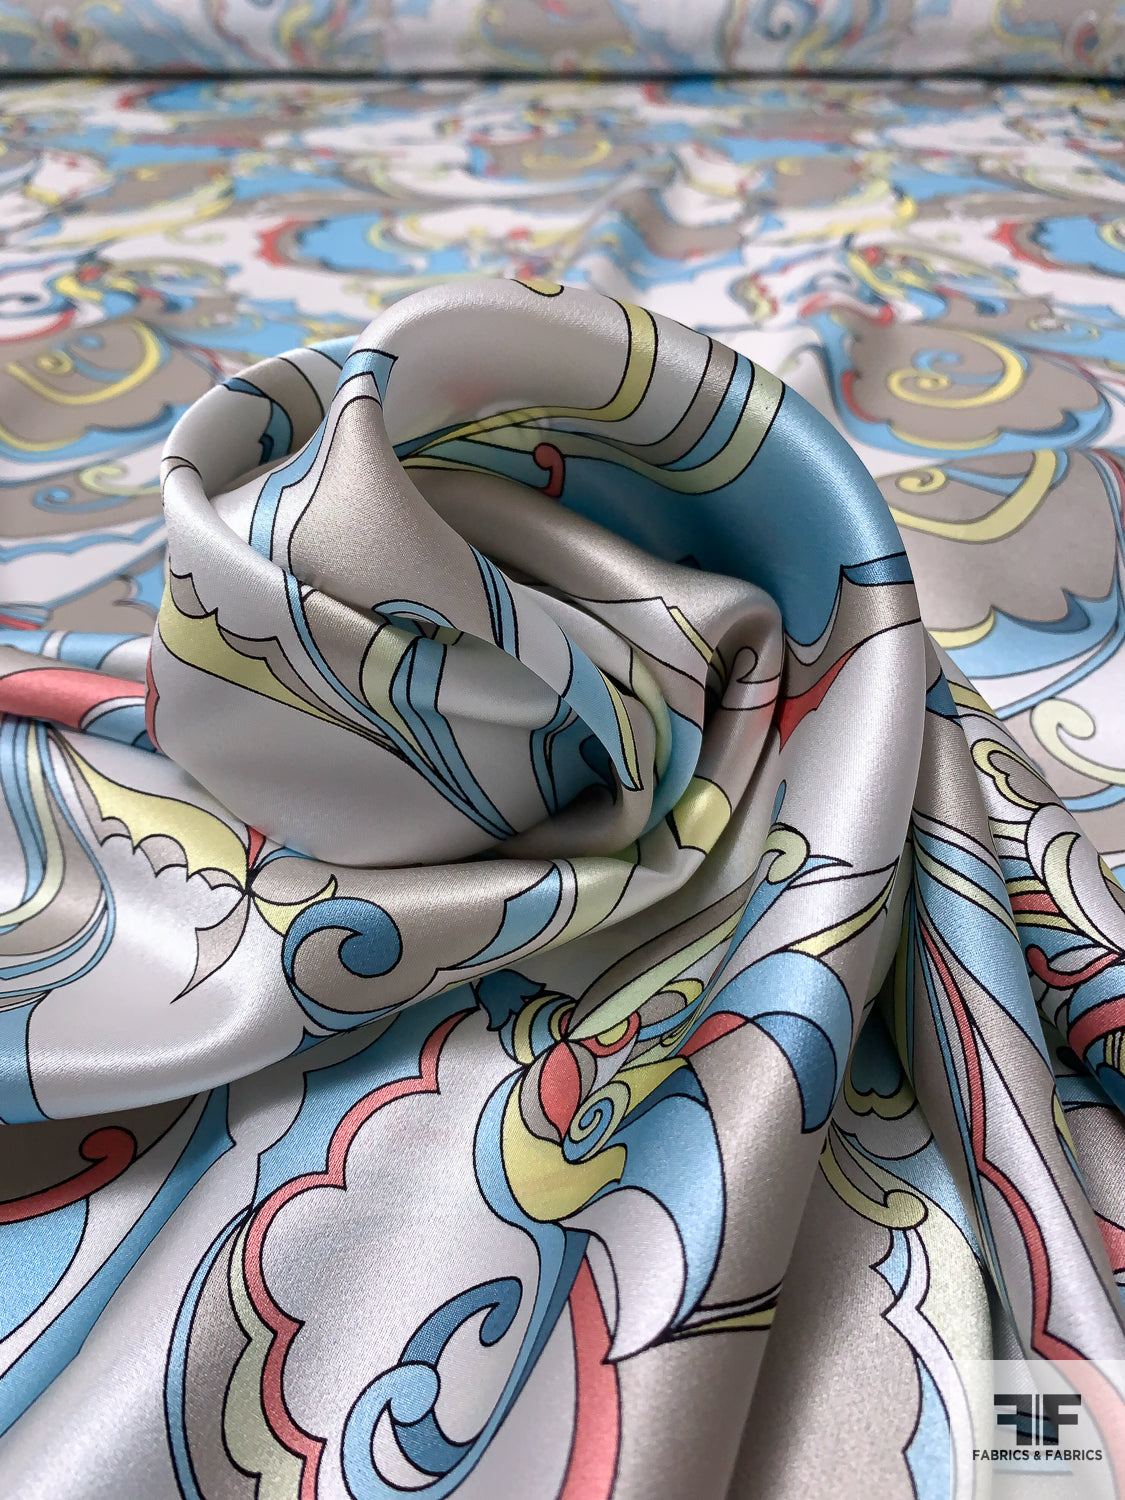 Pucci-esque Paisley-Like Printed Silk Charmeuse - Sky Blue / Coral / Yellow / Light Grey